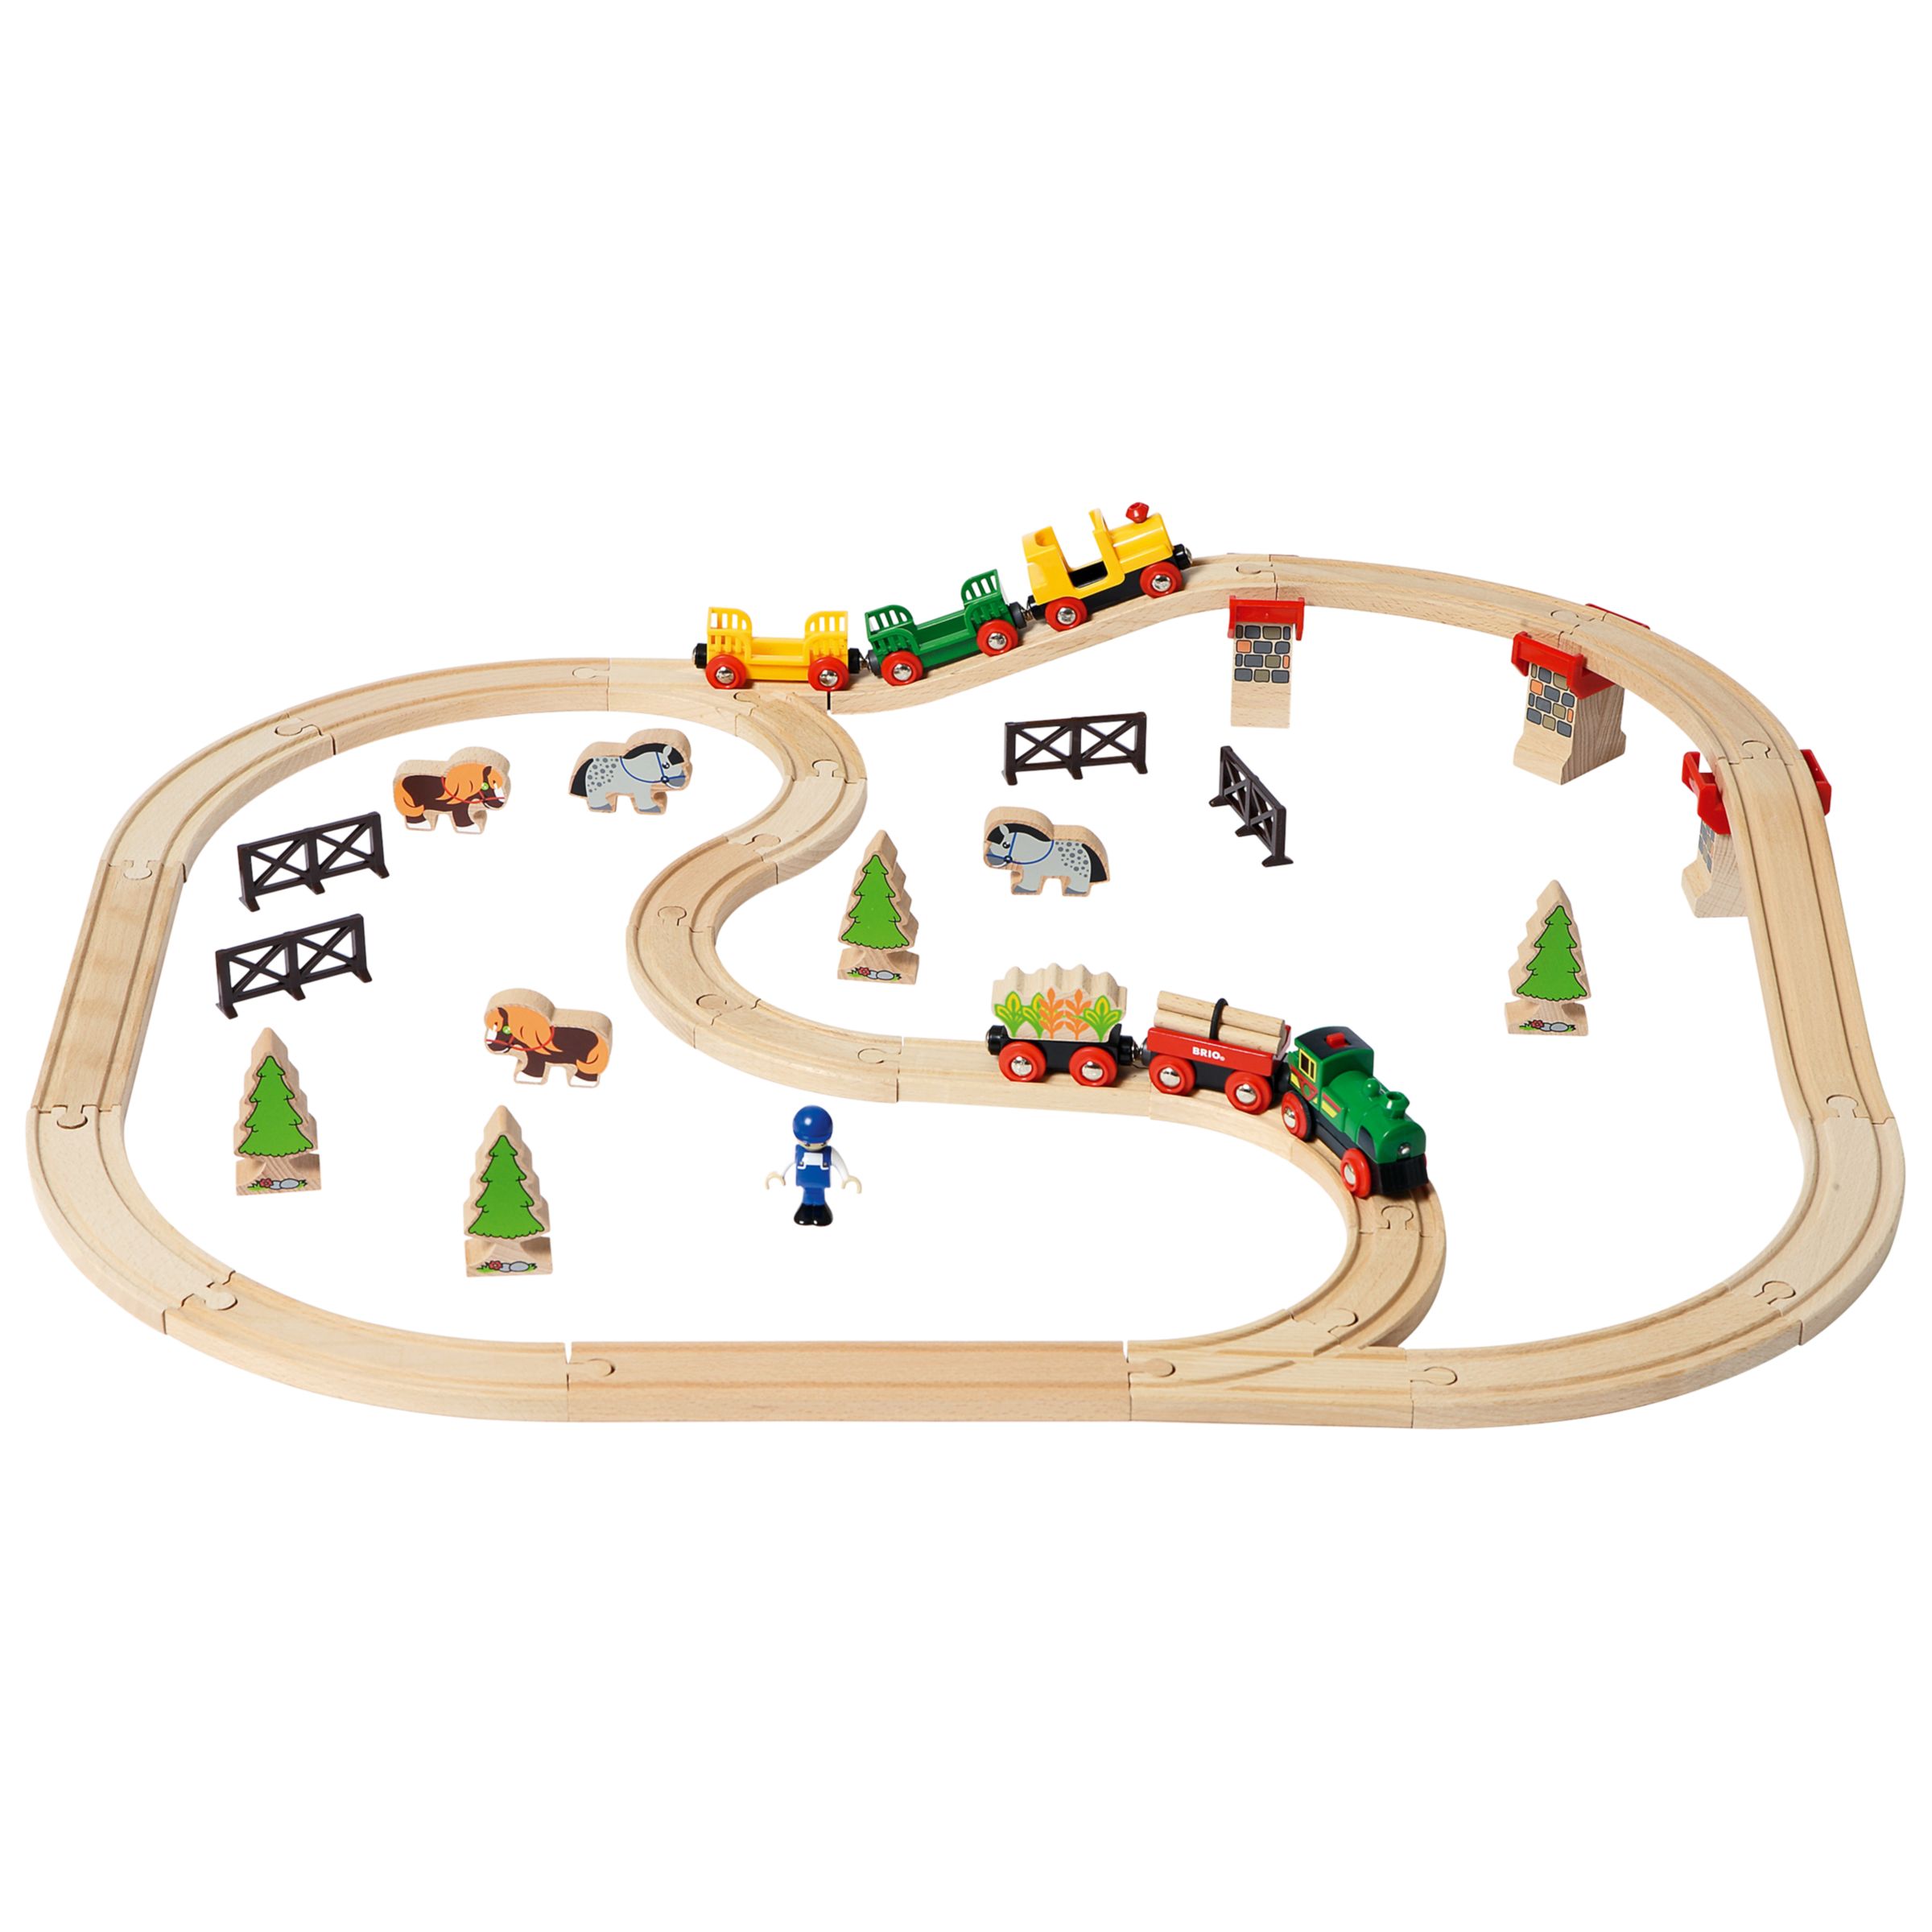 Brio train set | Shop for cheap Baby Toys and Save online